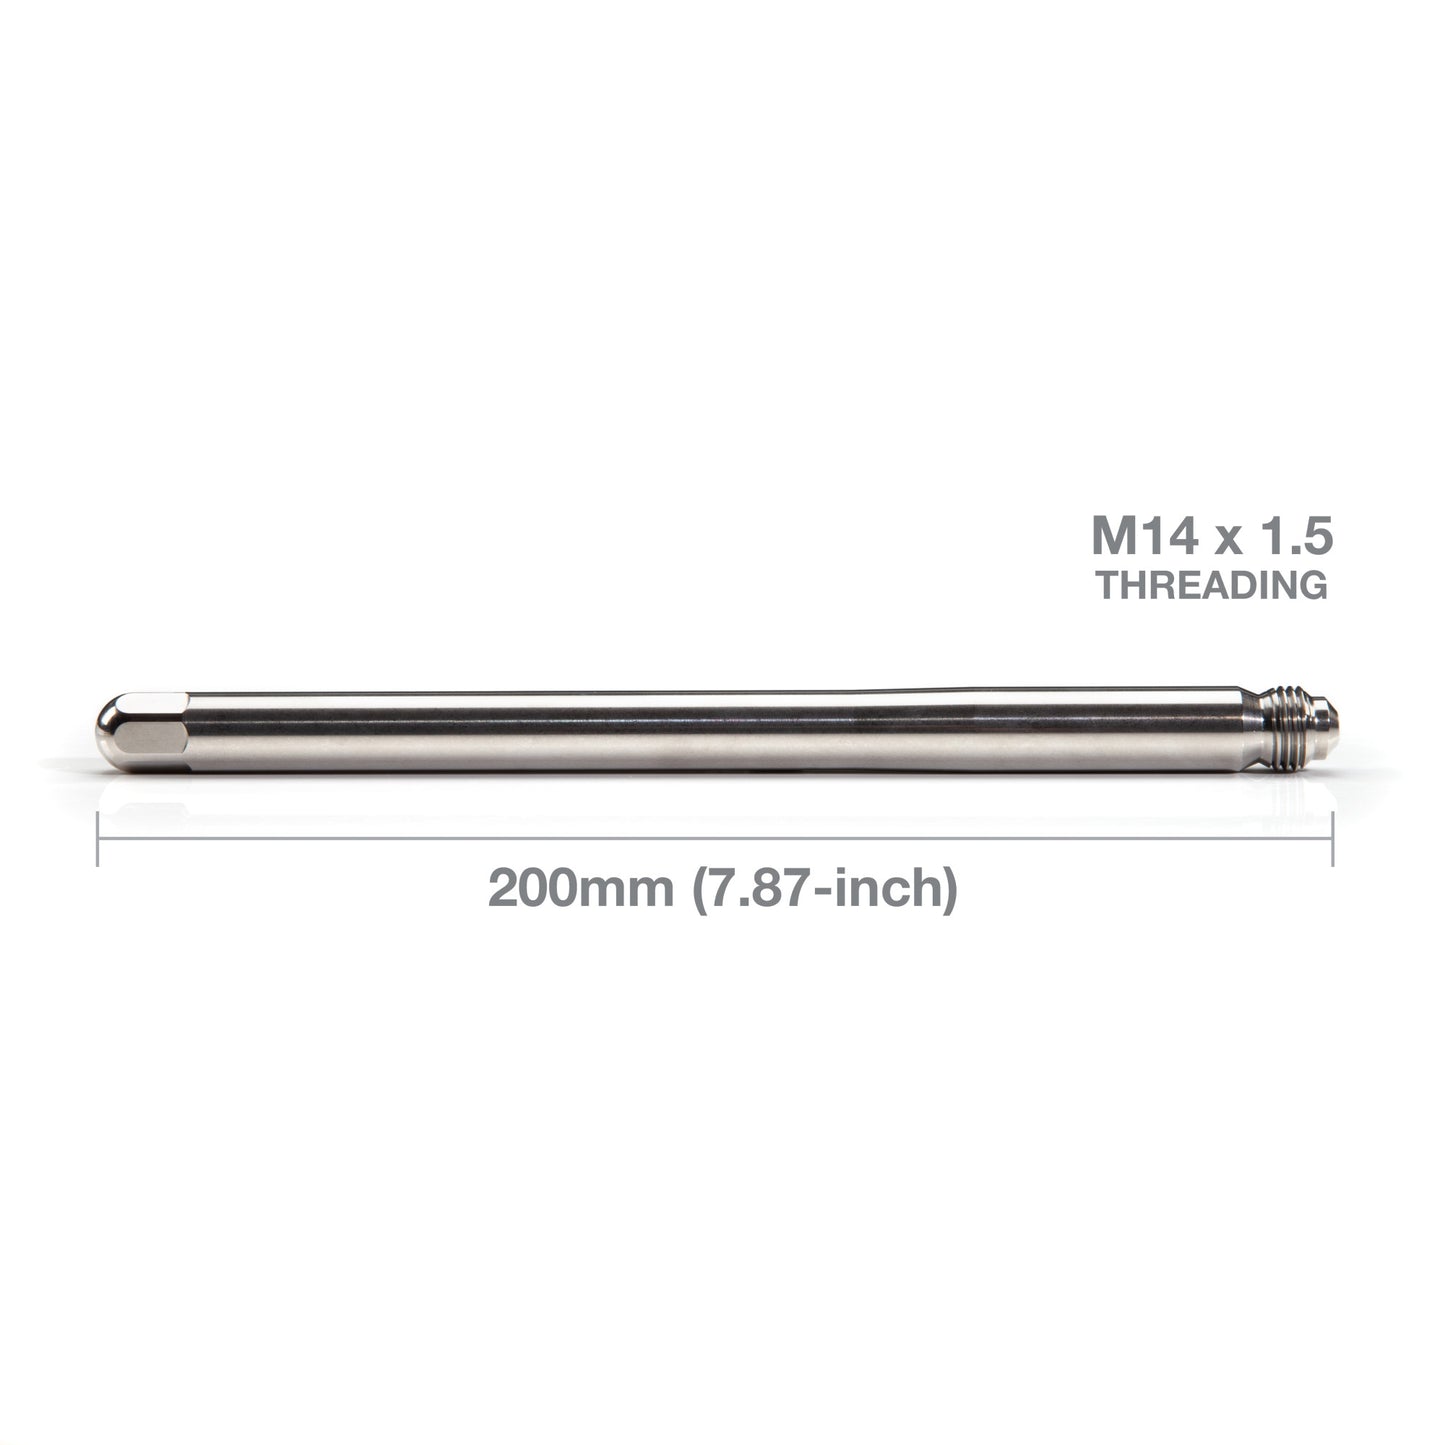 Stainless Steel M14 x 1.5 Hex End Extra-Long Wheel Hanger and Lug Guide Tool